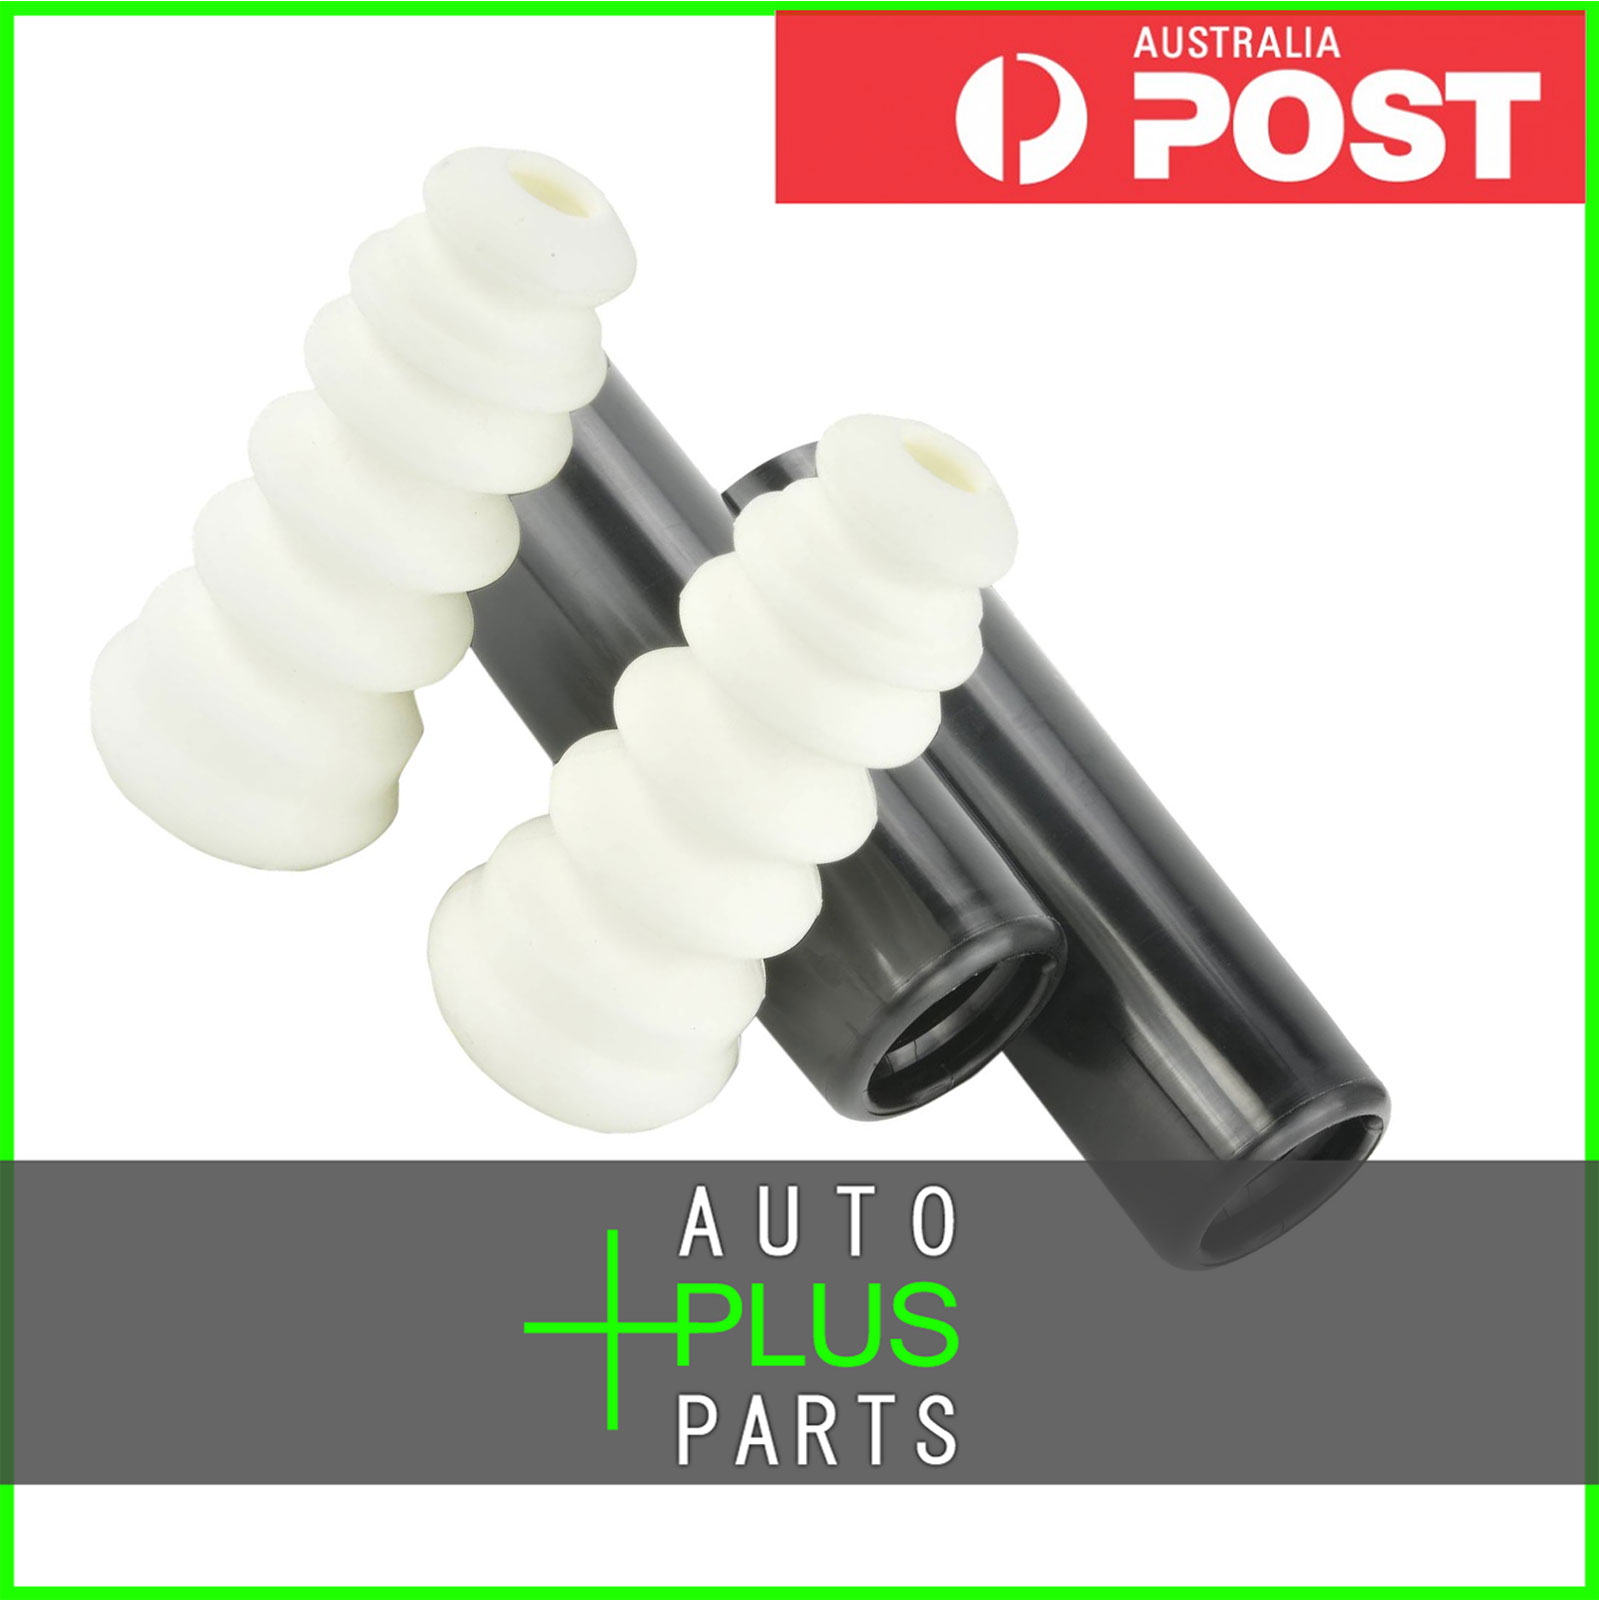 Fits VW BORA BOOT WITH JOUNCE BUMPER REAR SHOCK ABSORBER KIT - BORA Product Photo